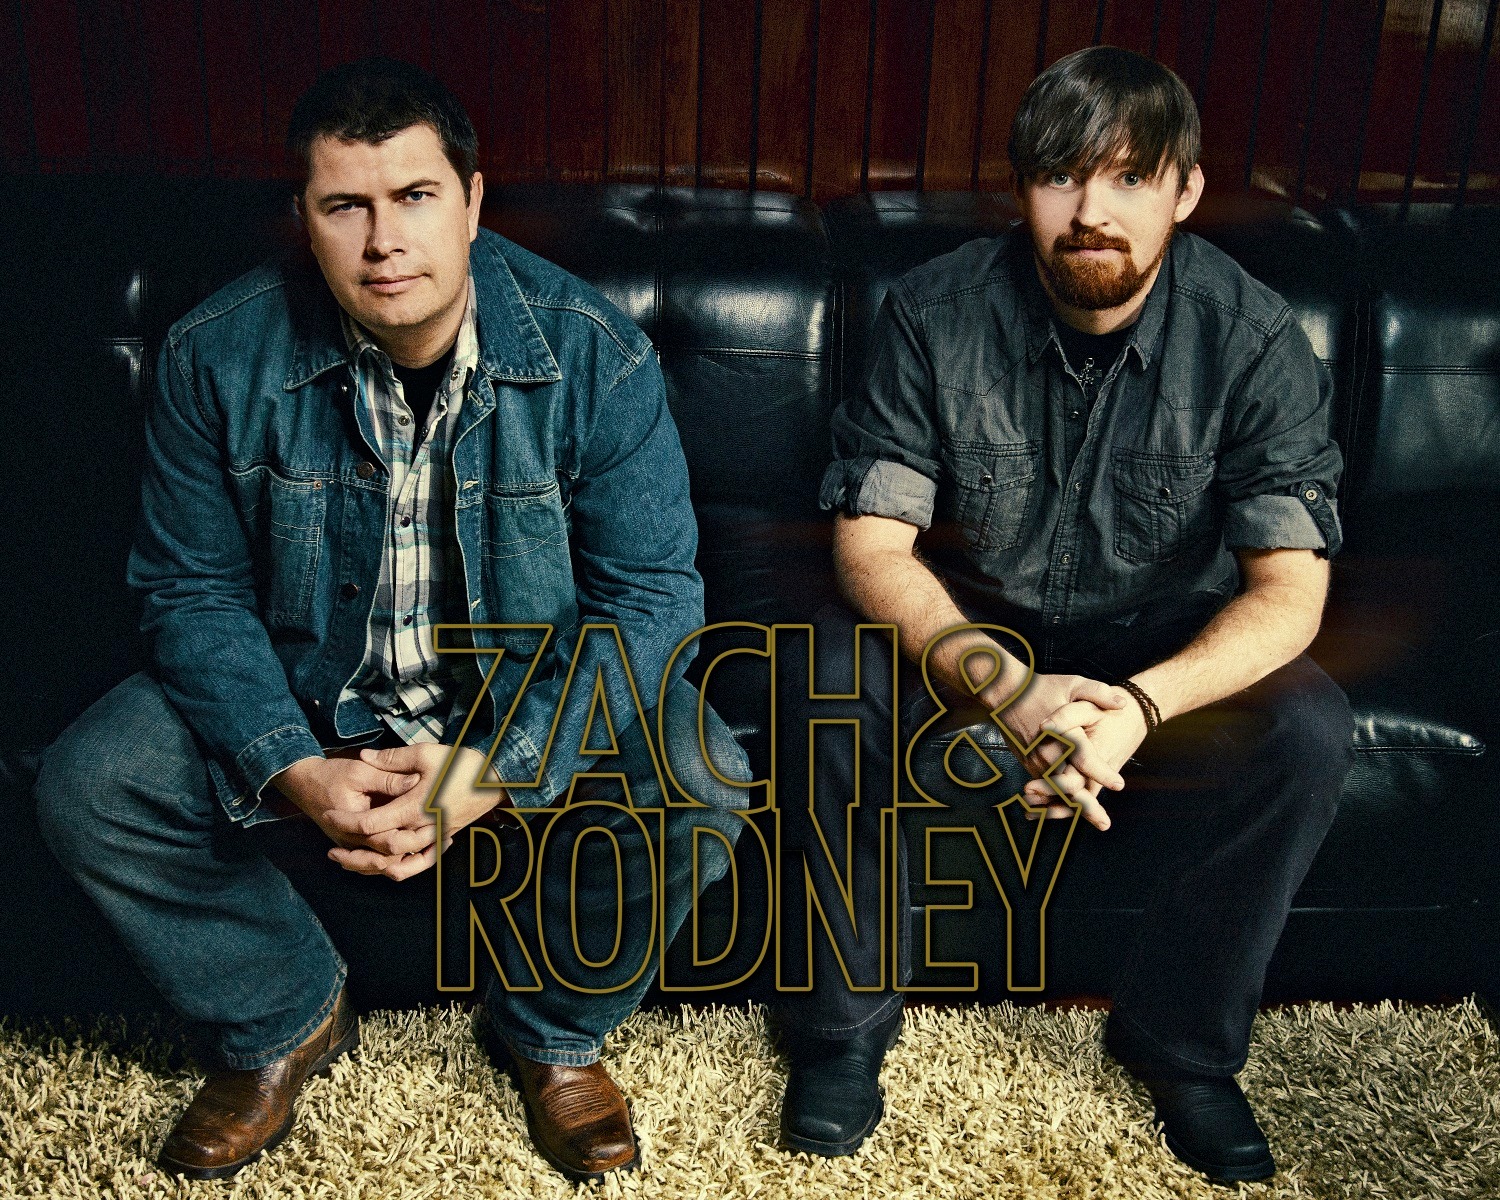 Christian Country Duo Zach and Rodney Release Video Honoring Veterans